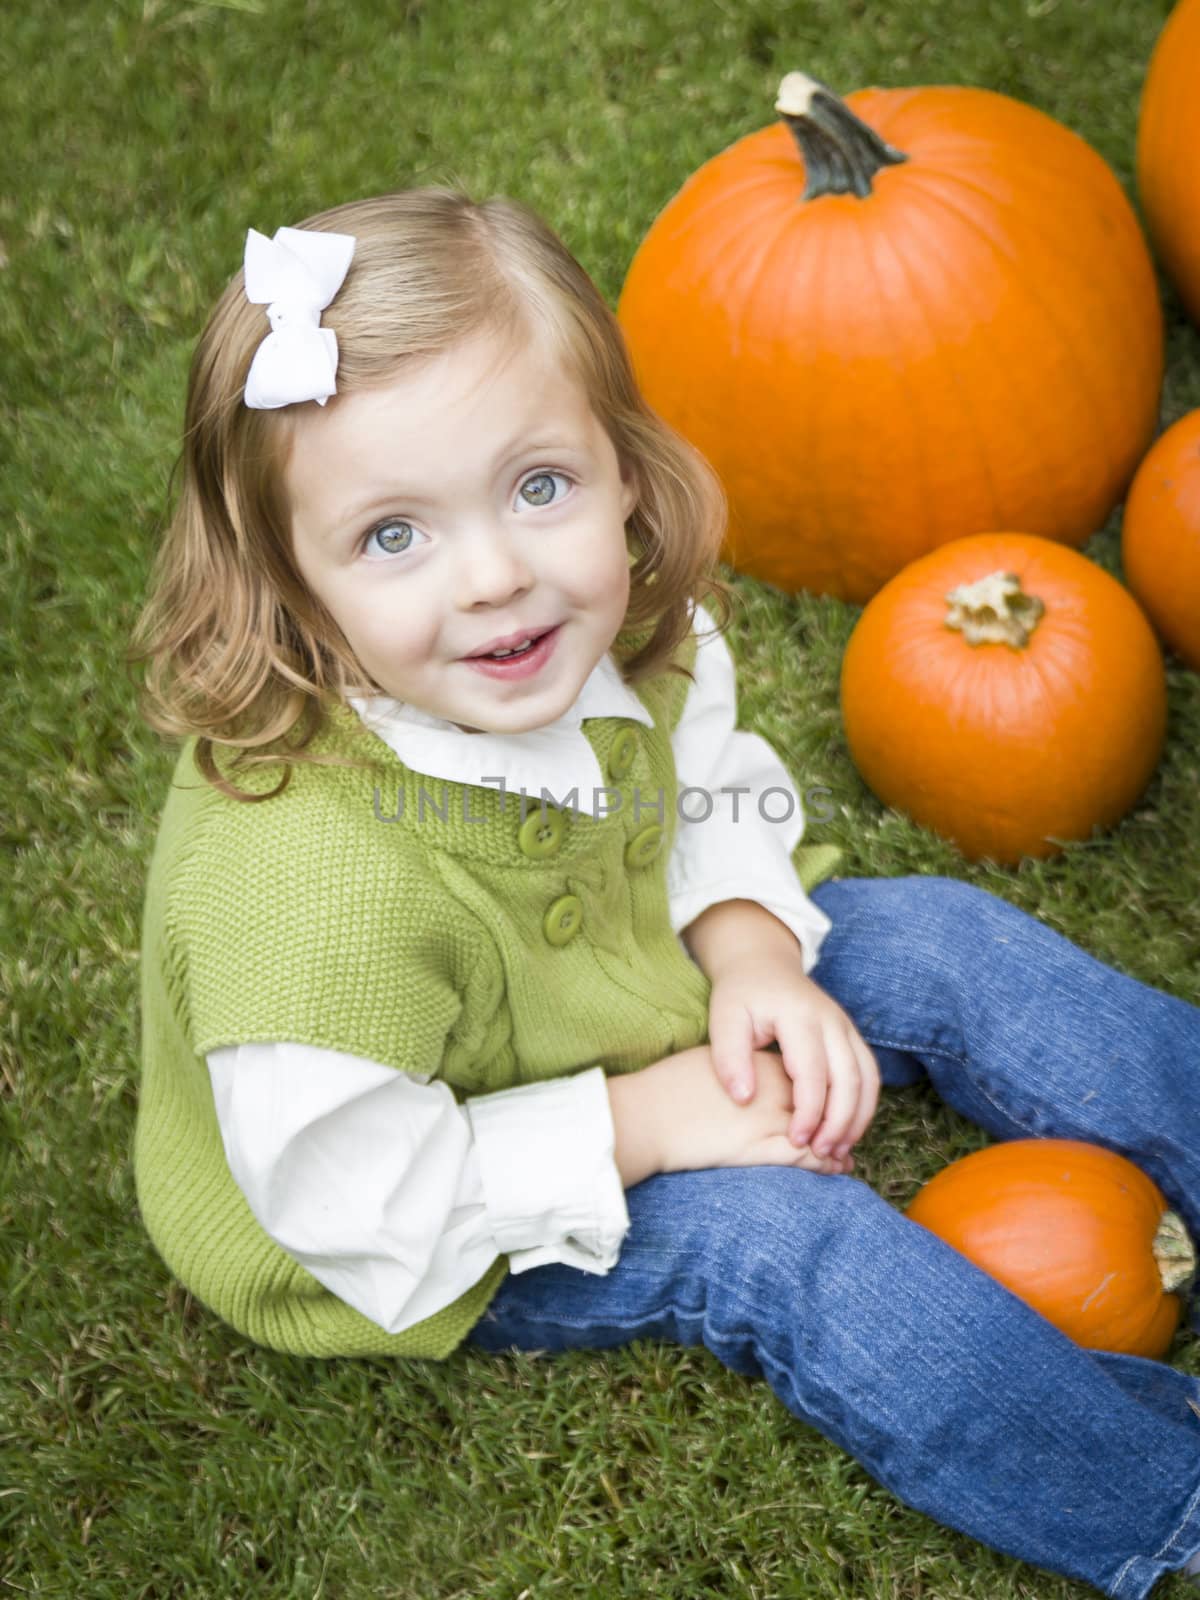 Cute Young Child Girl Enjoying the Pumpkin Patch. by Feverpitched